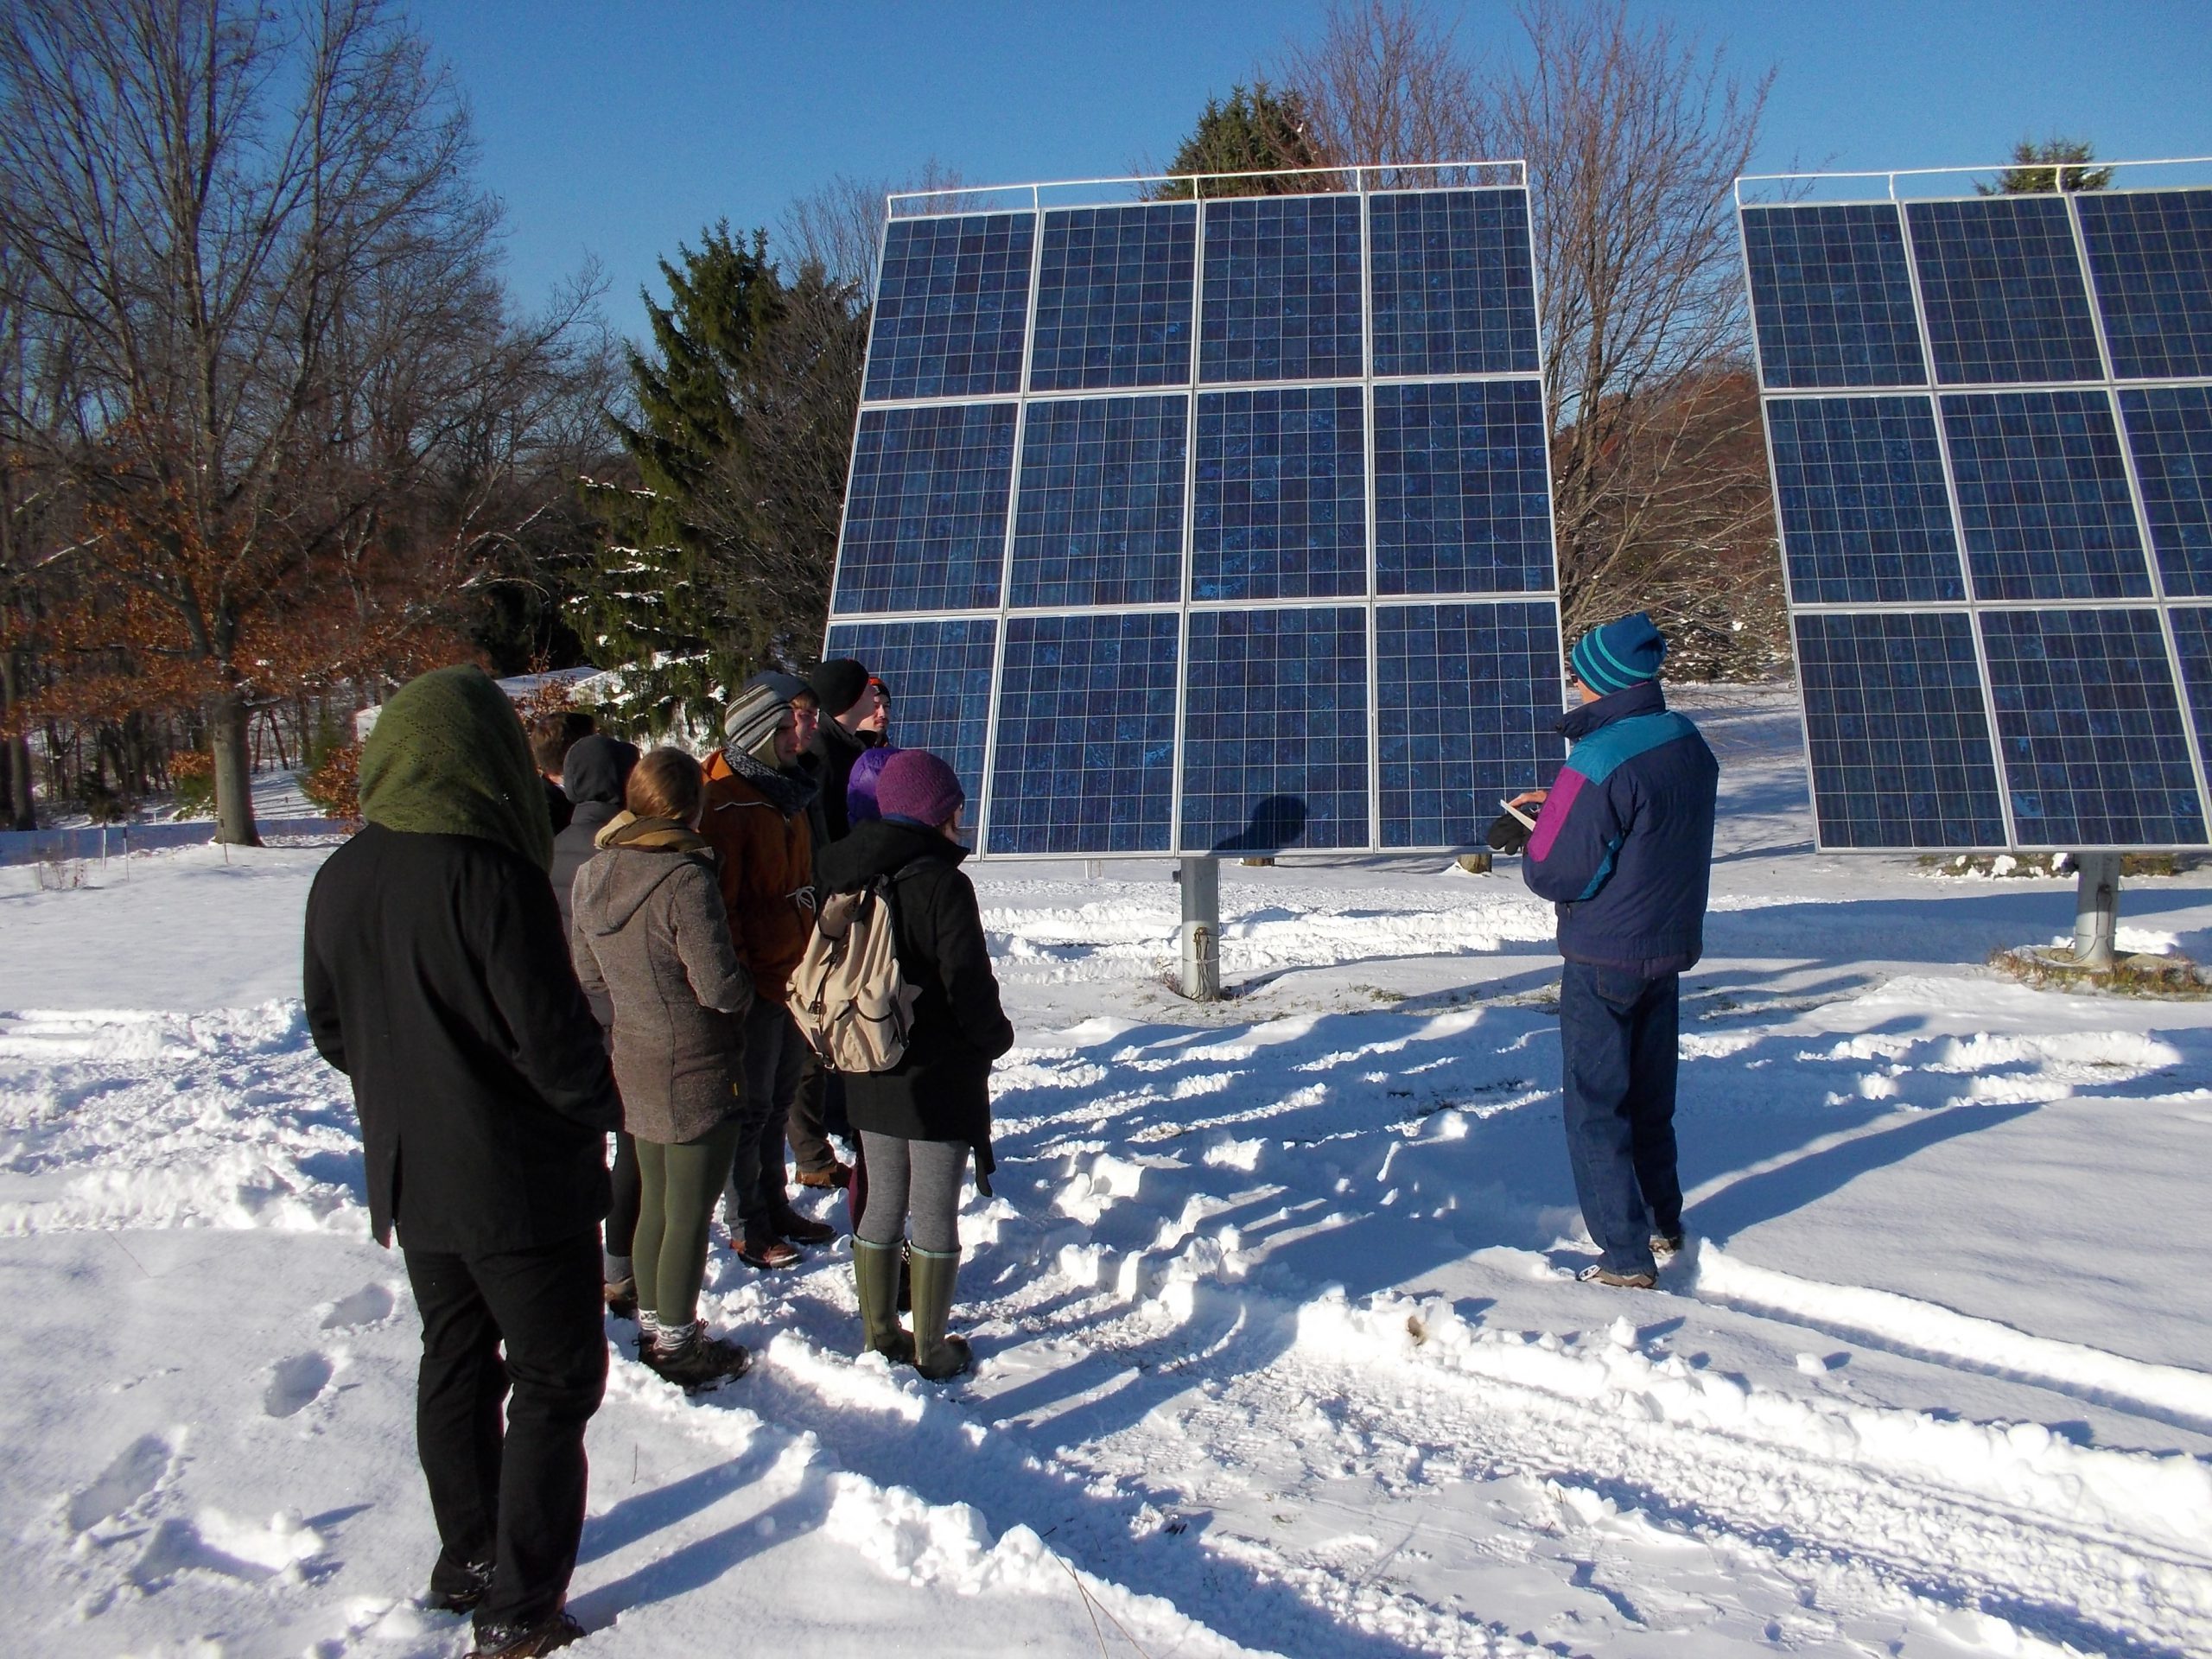 Dr. Askew shows students a photovoltaic (PV) power system